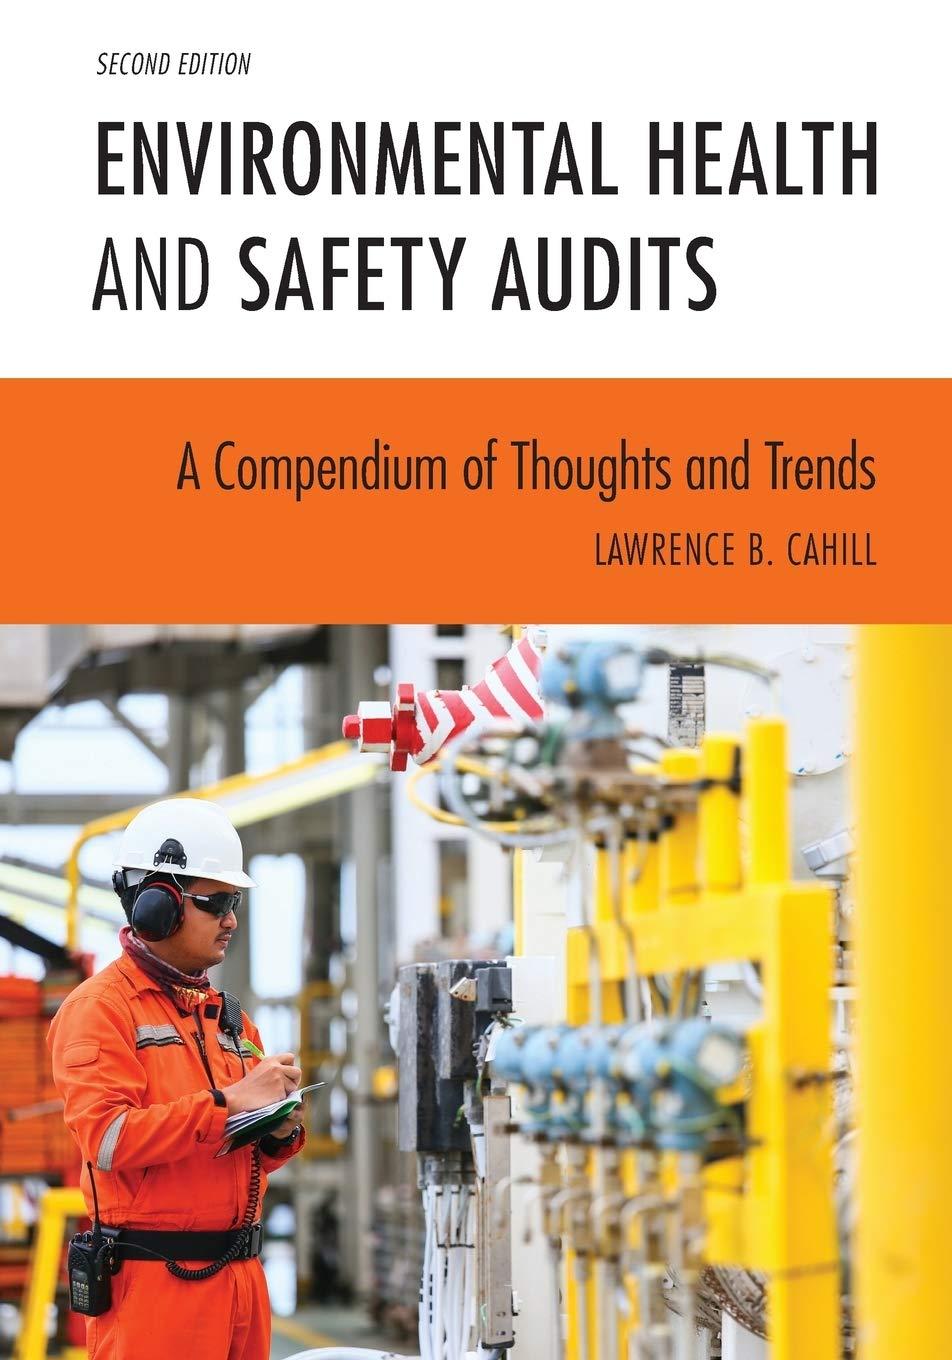 environmental health and safety audits a compendium of thoughts and trends 2nd edition lawrence b. cahill